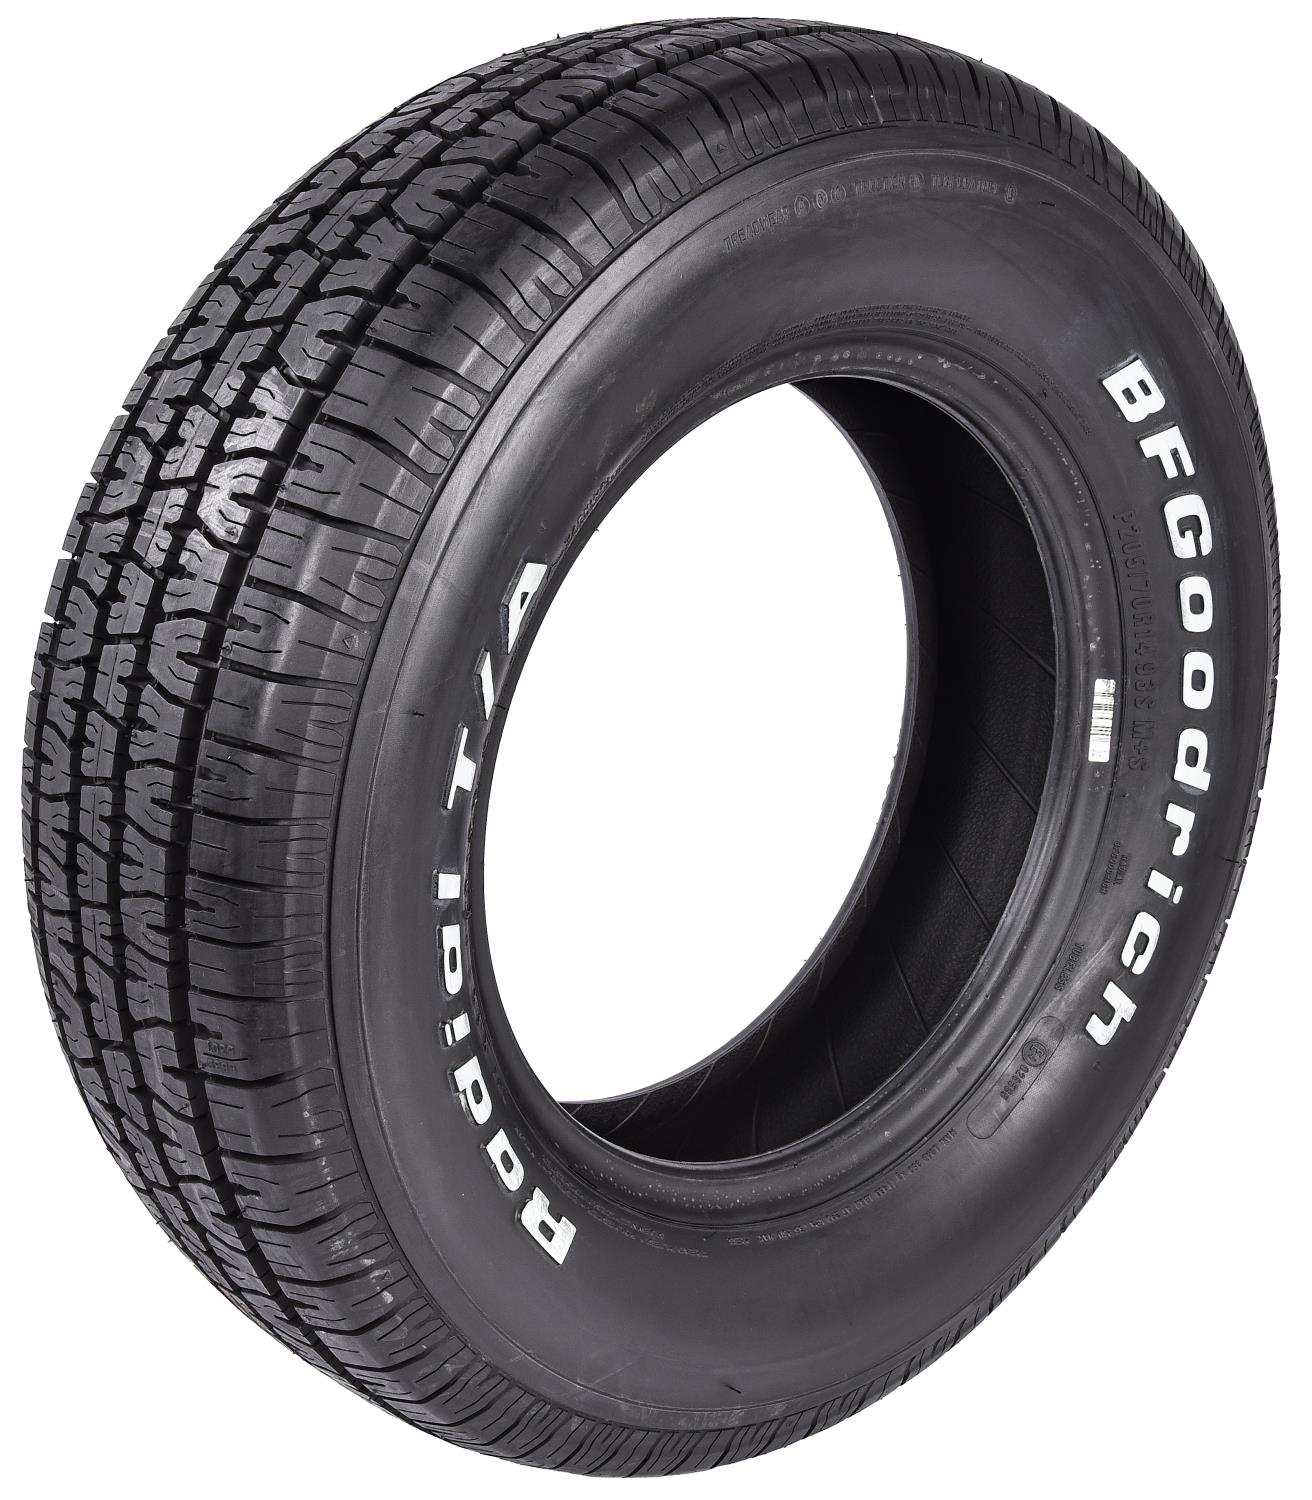 Radial T/A Tire P205/70R14